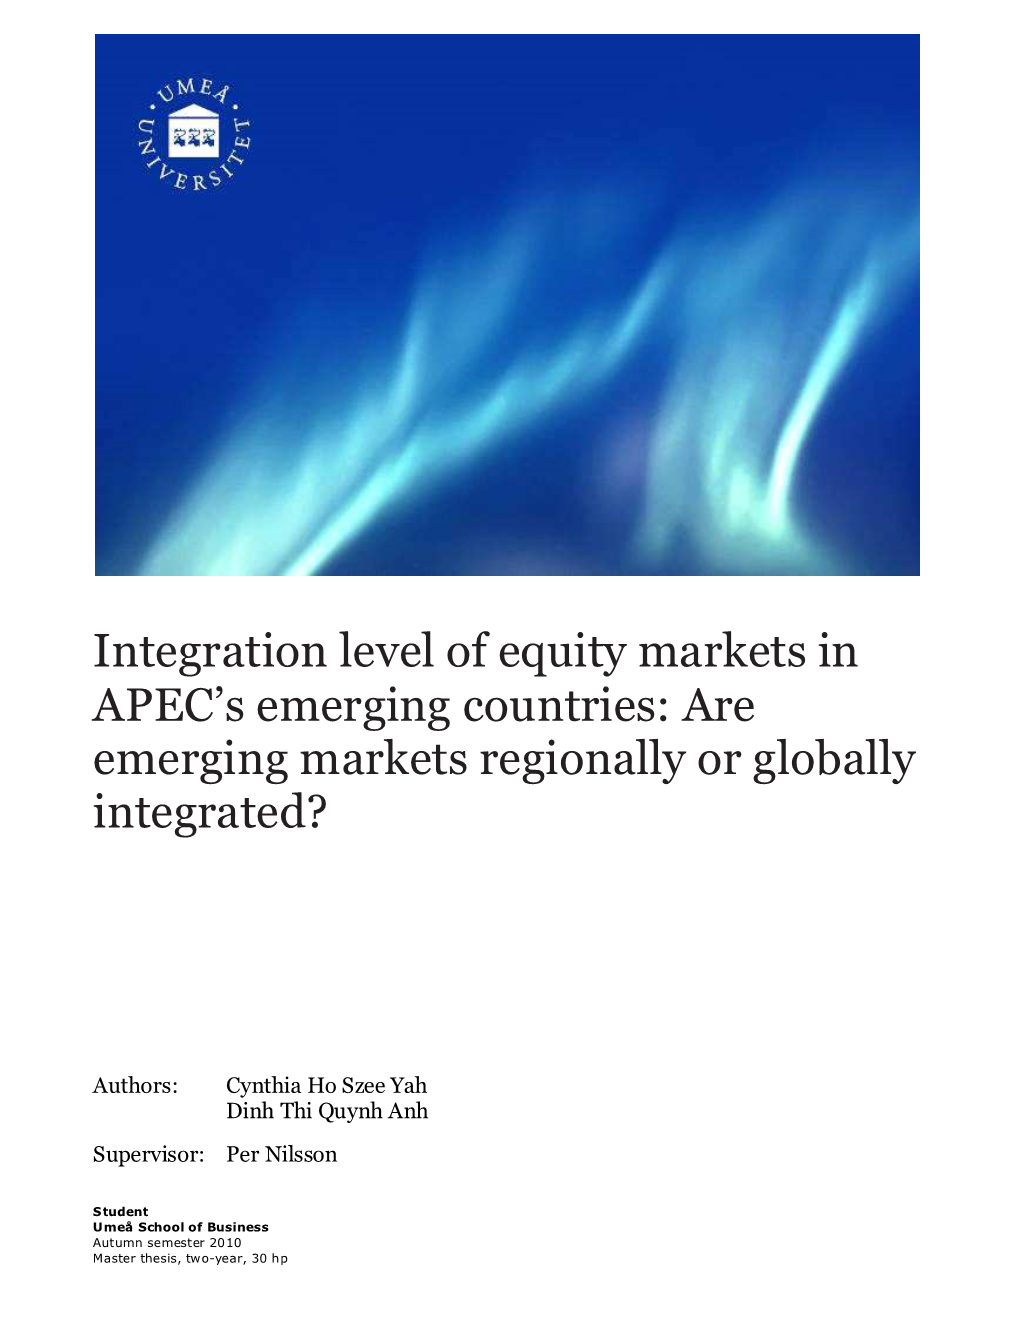 Integration Level of Equity Markets in APEC's Emerging